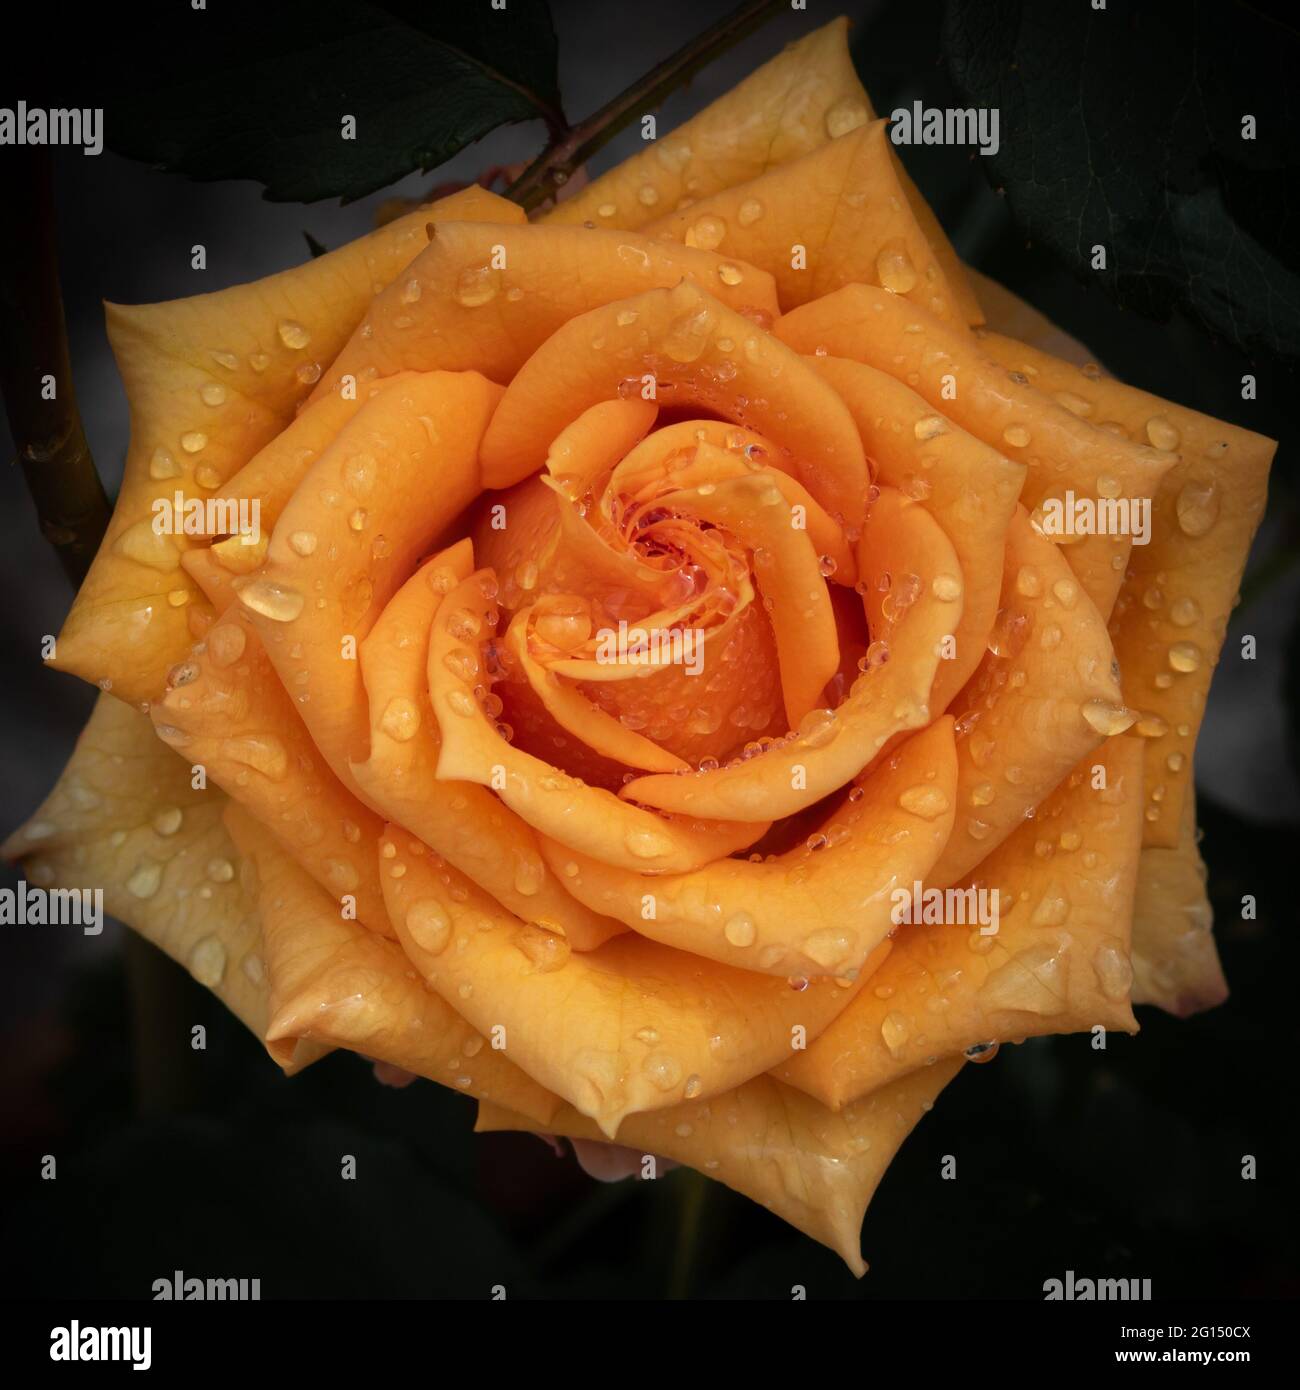 Close-up of orange rose with water droplets on the petals on a dark blurry background. Flower photo with moody tones taken after the rain Stock Photo